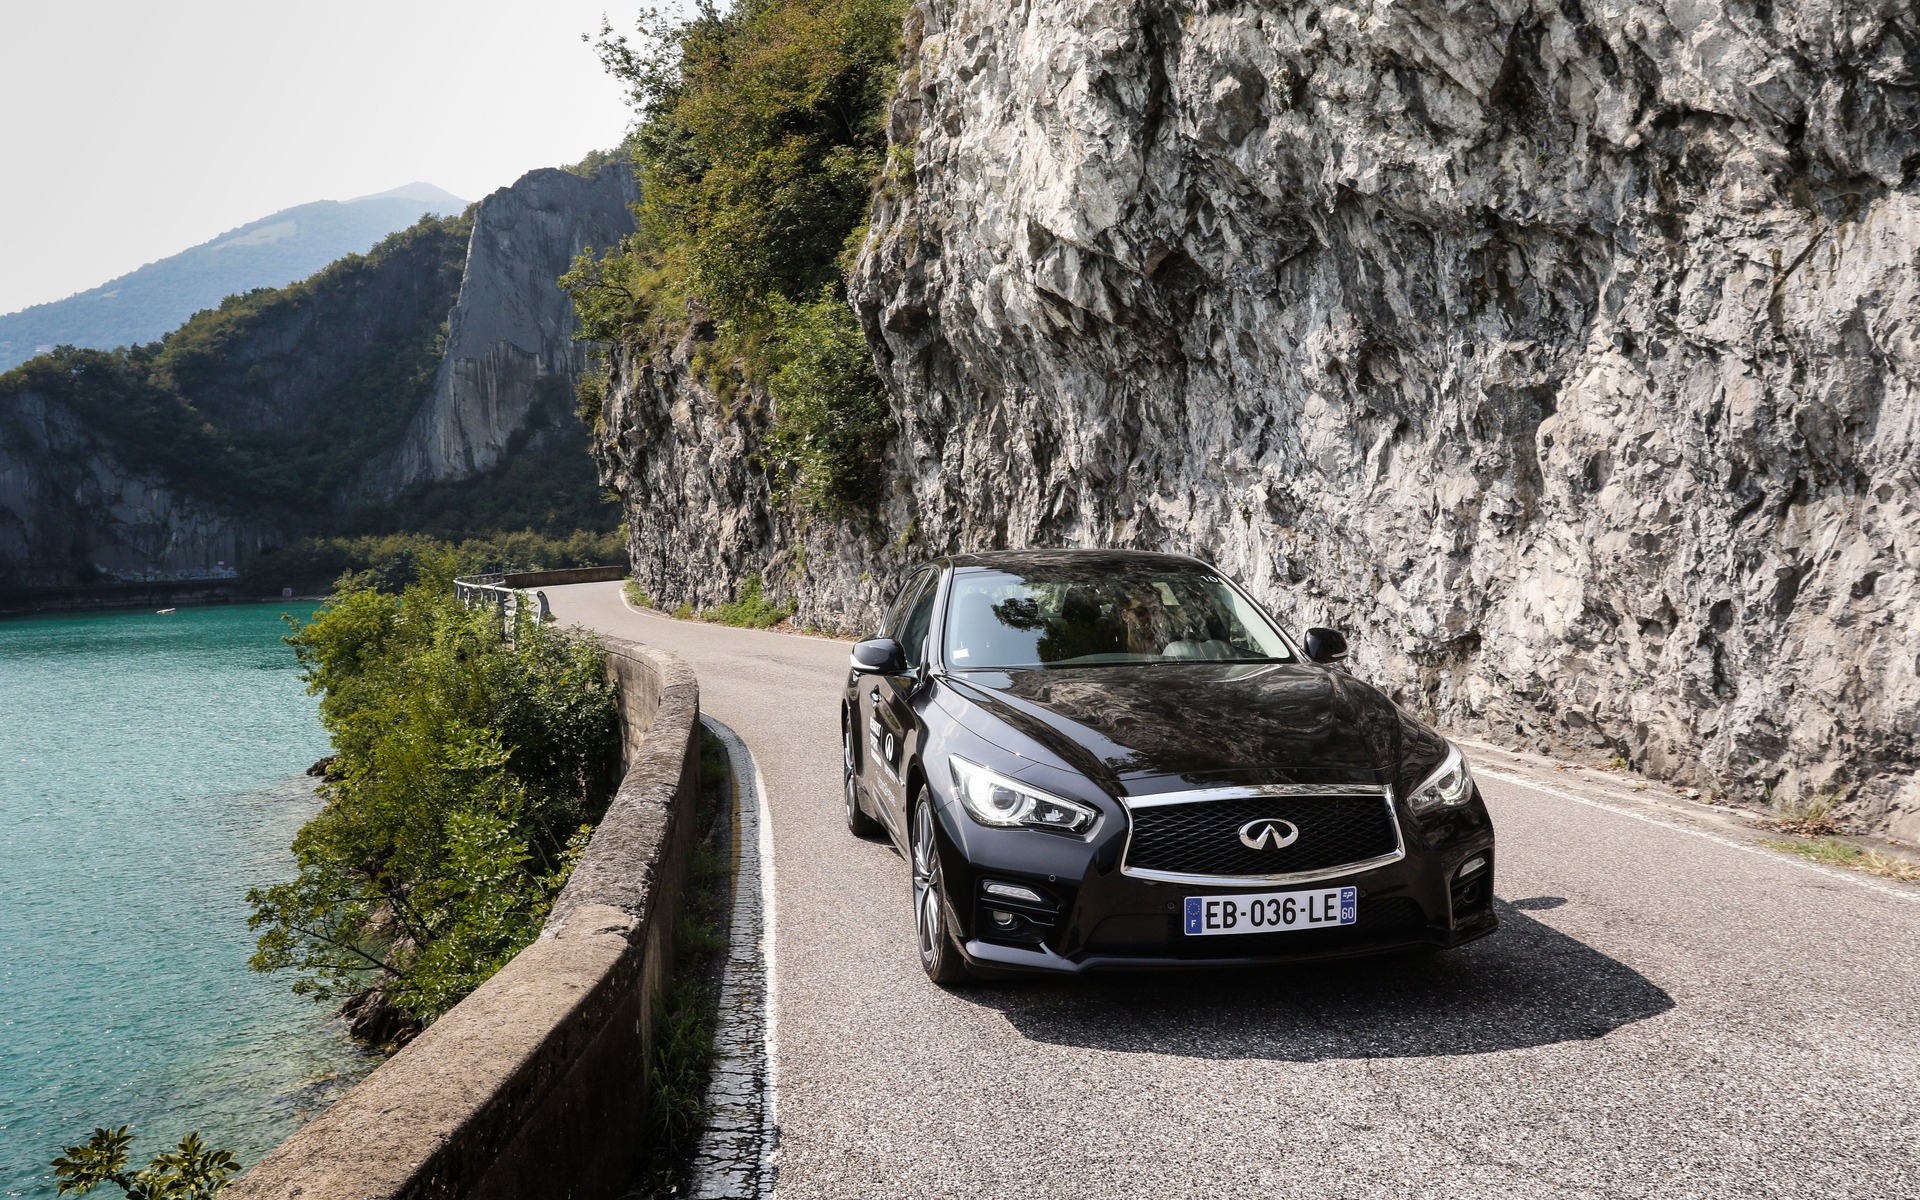 Infiniti Q50 Hybrid 2016 - Une direction Steer-by-wire encore perfectible